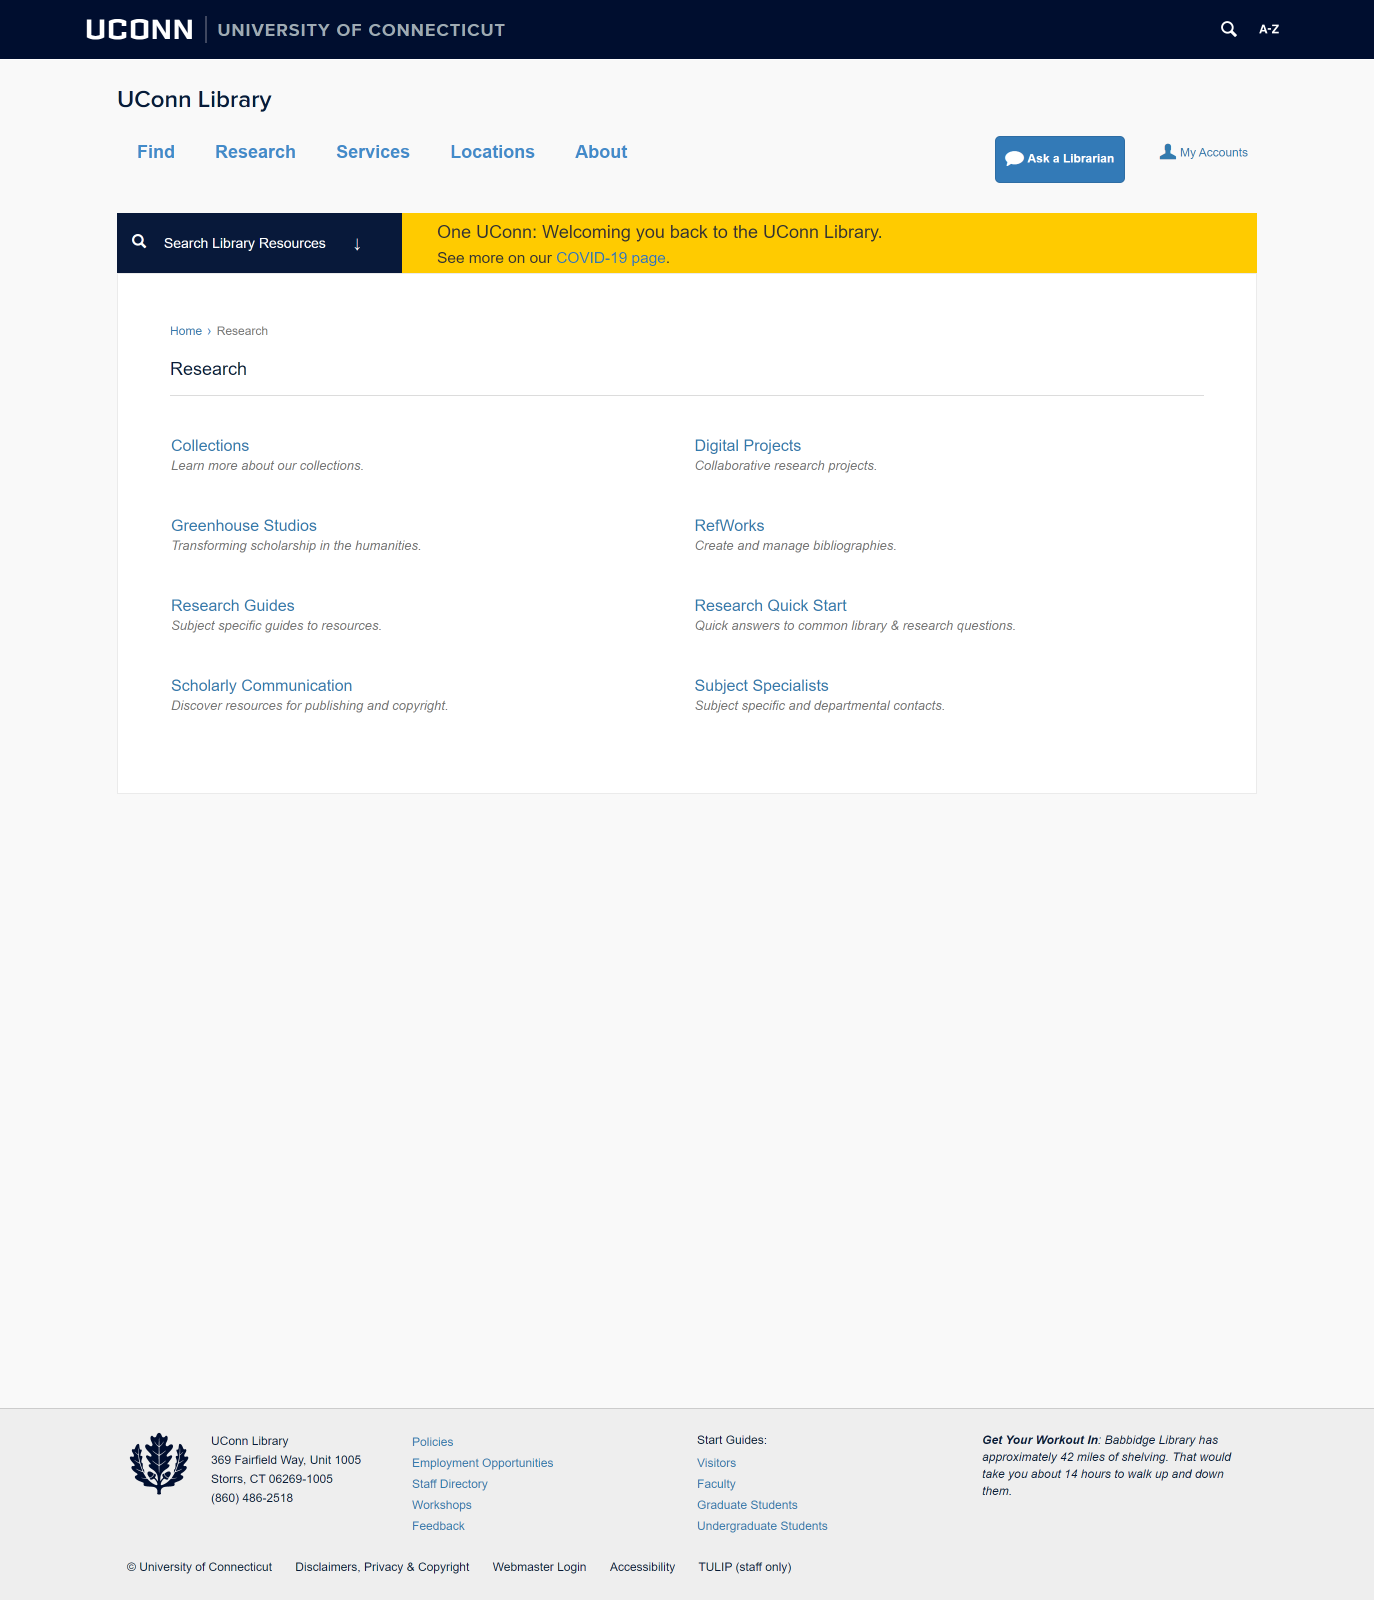 Screenshot of an interior page of the University Libraries website